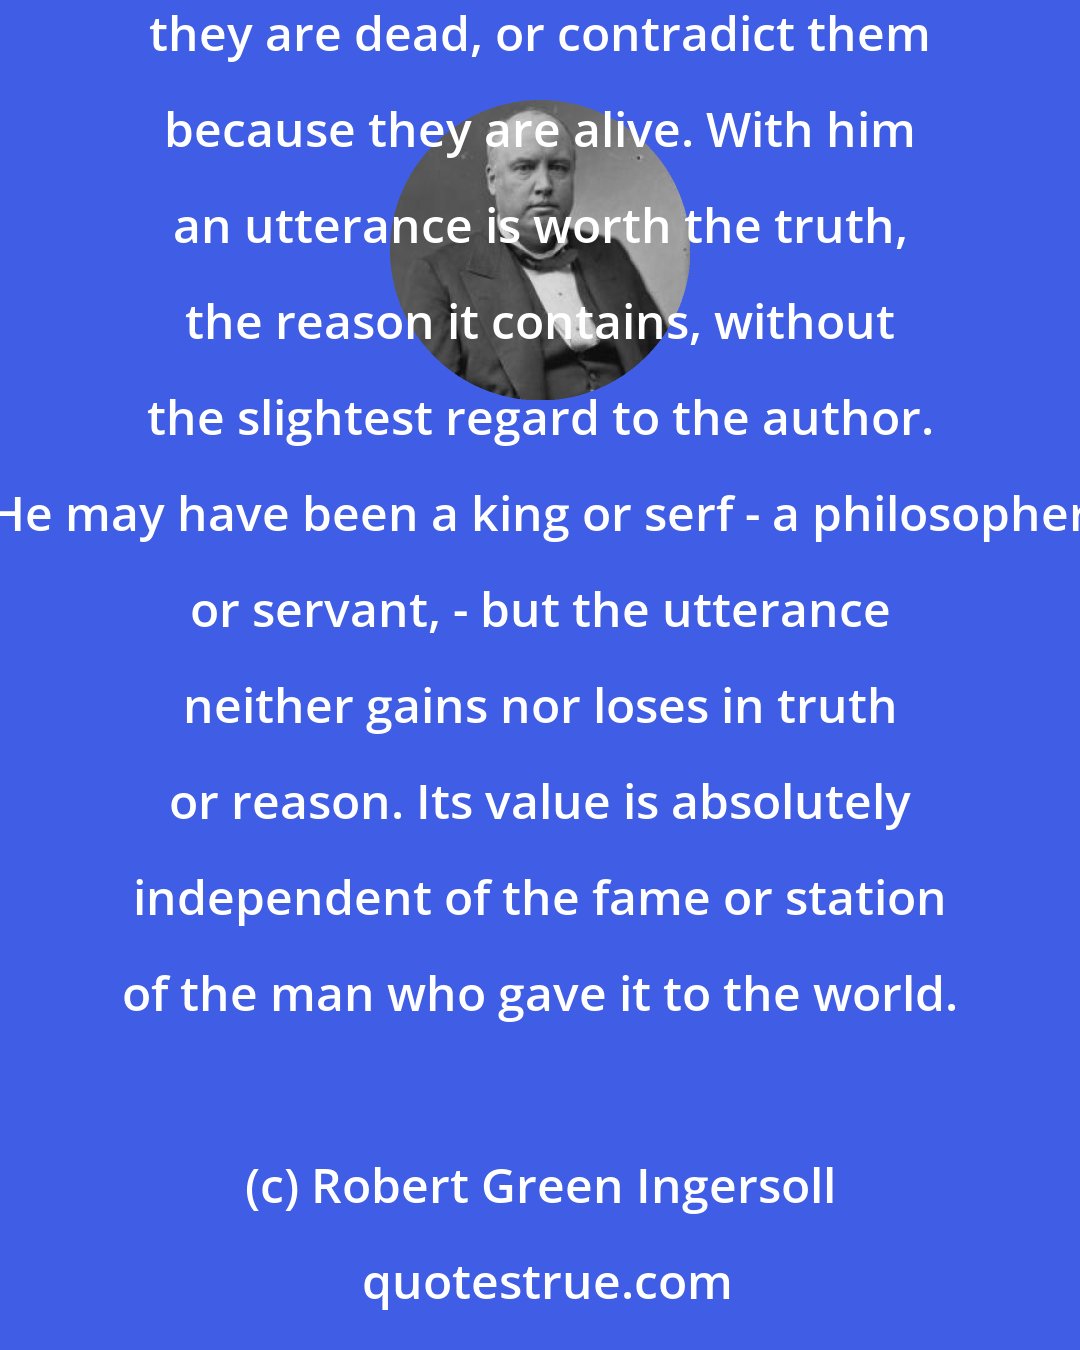 Robert Green Ingersoll: The real searcher after truth will not receive the old because it is old, or reject the new because it is new. He will not believe men because they are dead, or contradict them because they are alive. With him an utterance is worth the truth, the reason it contains, without the slightest regard to the author. He may have been a king or serf - a philosopher or servant, - but the utterance neither gains nor loses in truth or reason. Its value is absolutely independent of the fame or station of the man who gave it to the world.